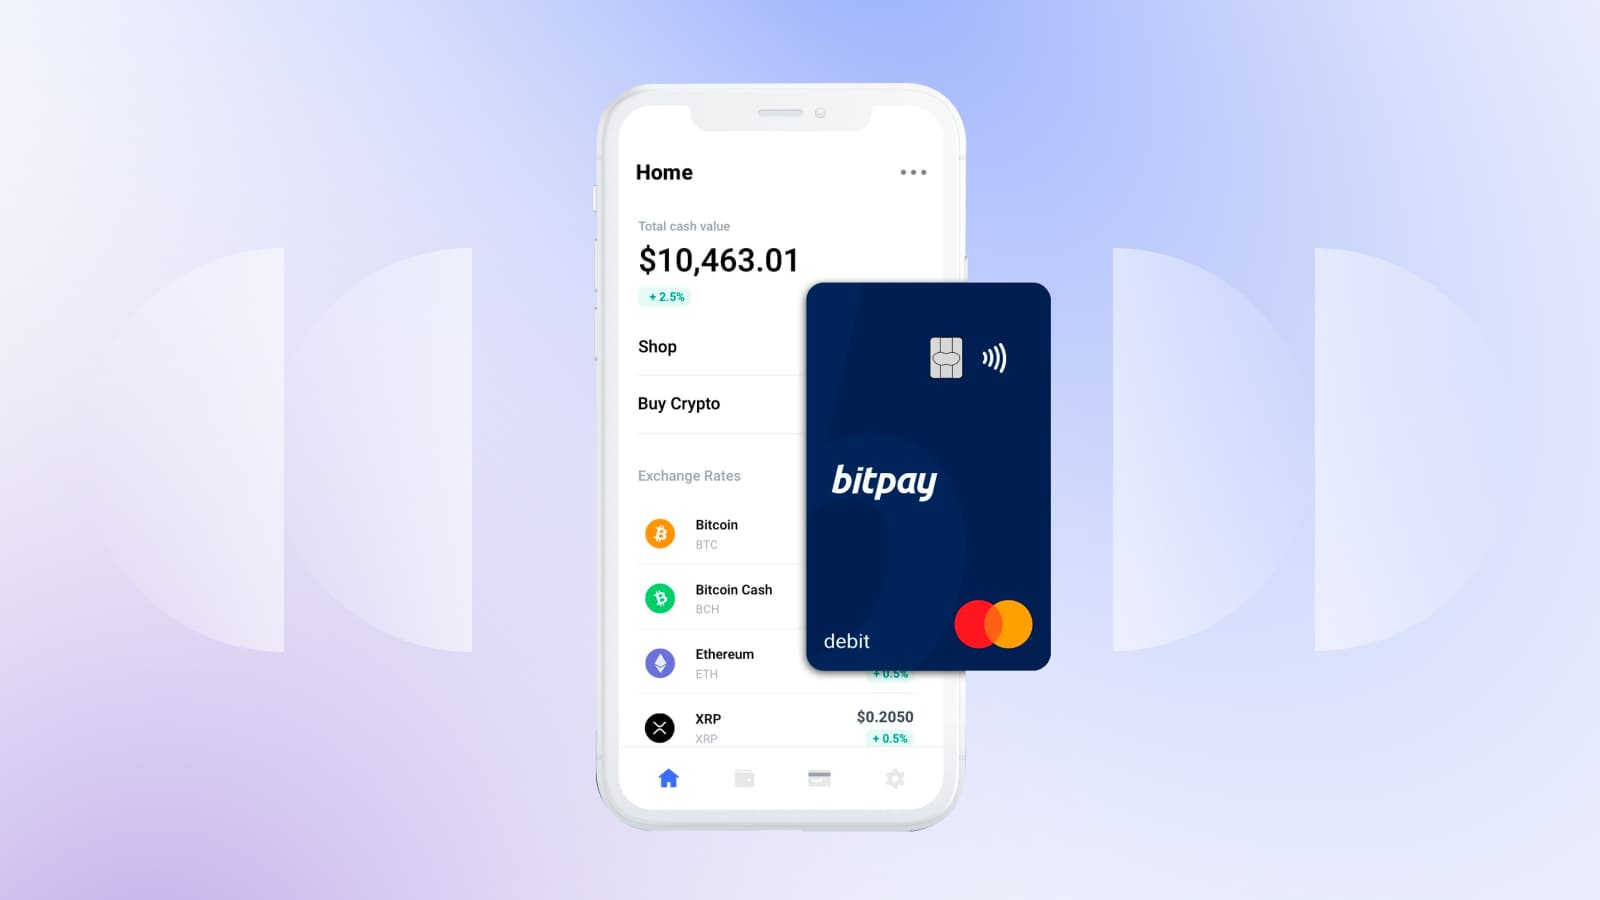 The BitPay prepaid card can be used to pay with 15 cryptocurrencies and tokens.